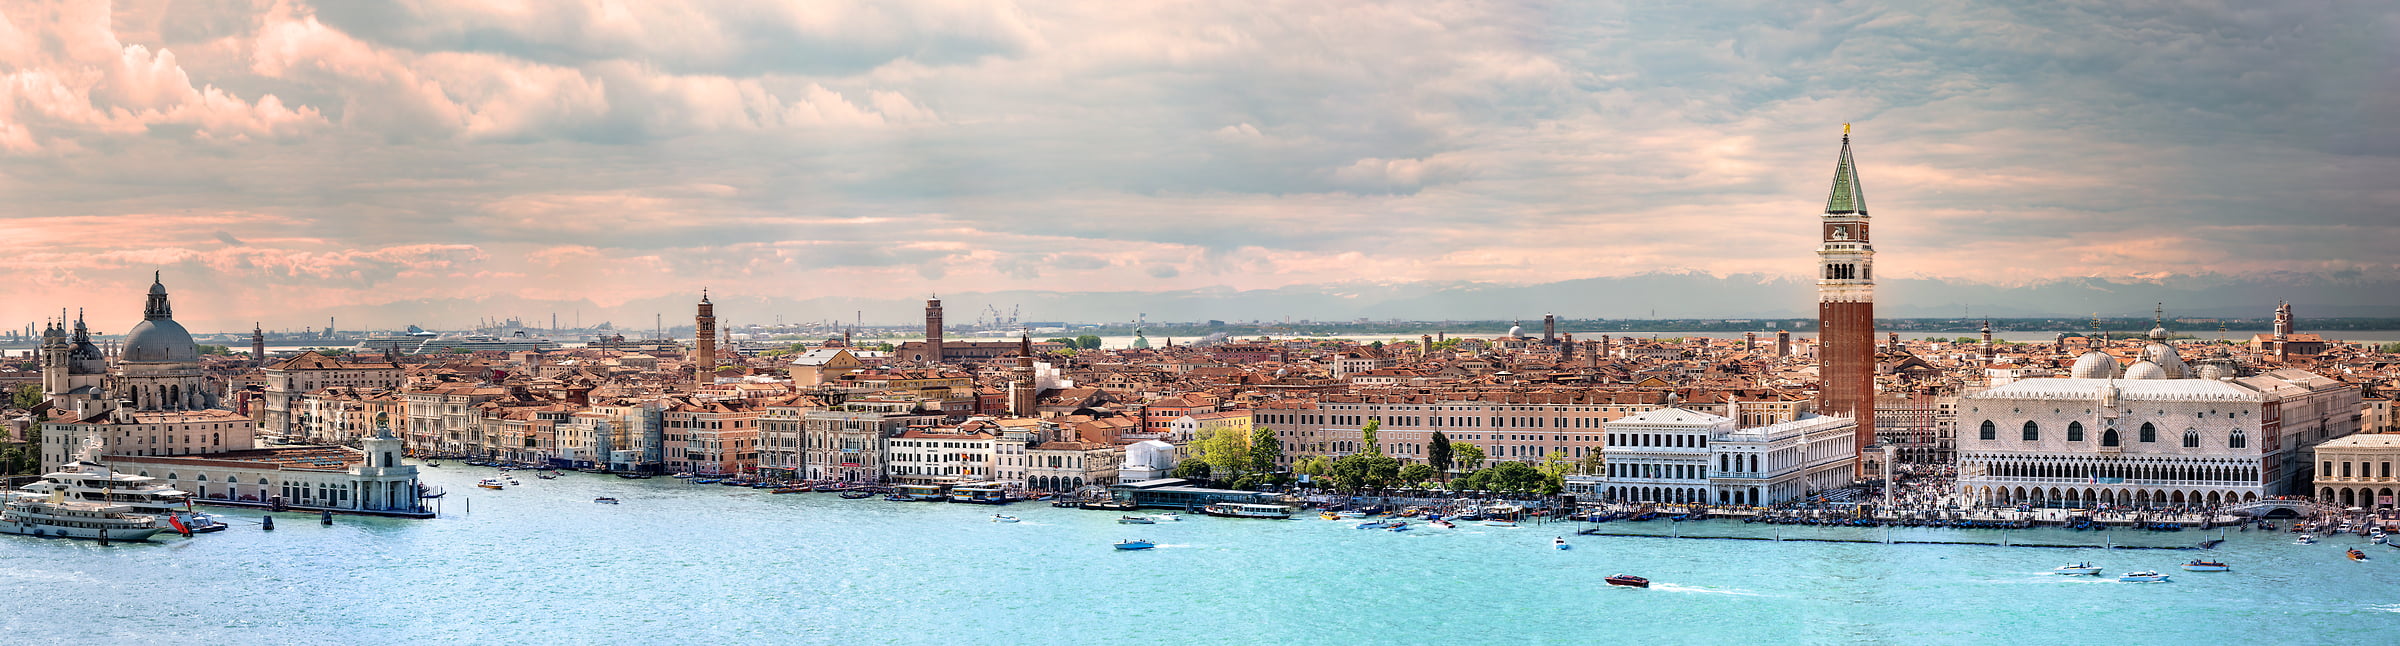 523 megapixels! A very high resolution, large-format VAST photo print of Venice, Italy with the Campanile di San Marco, canals, and boats; fine art cityscape photograph created by Justin Katz in Venice, Italy.